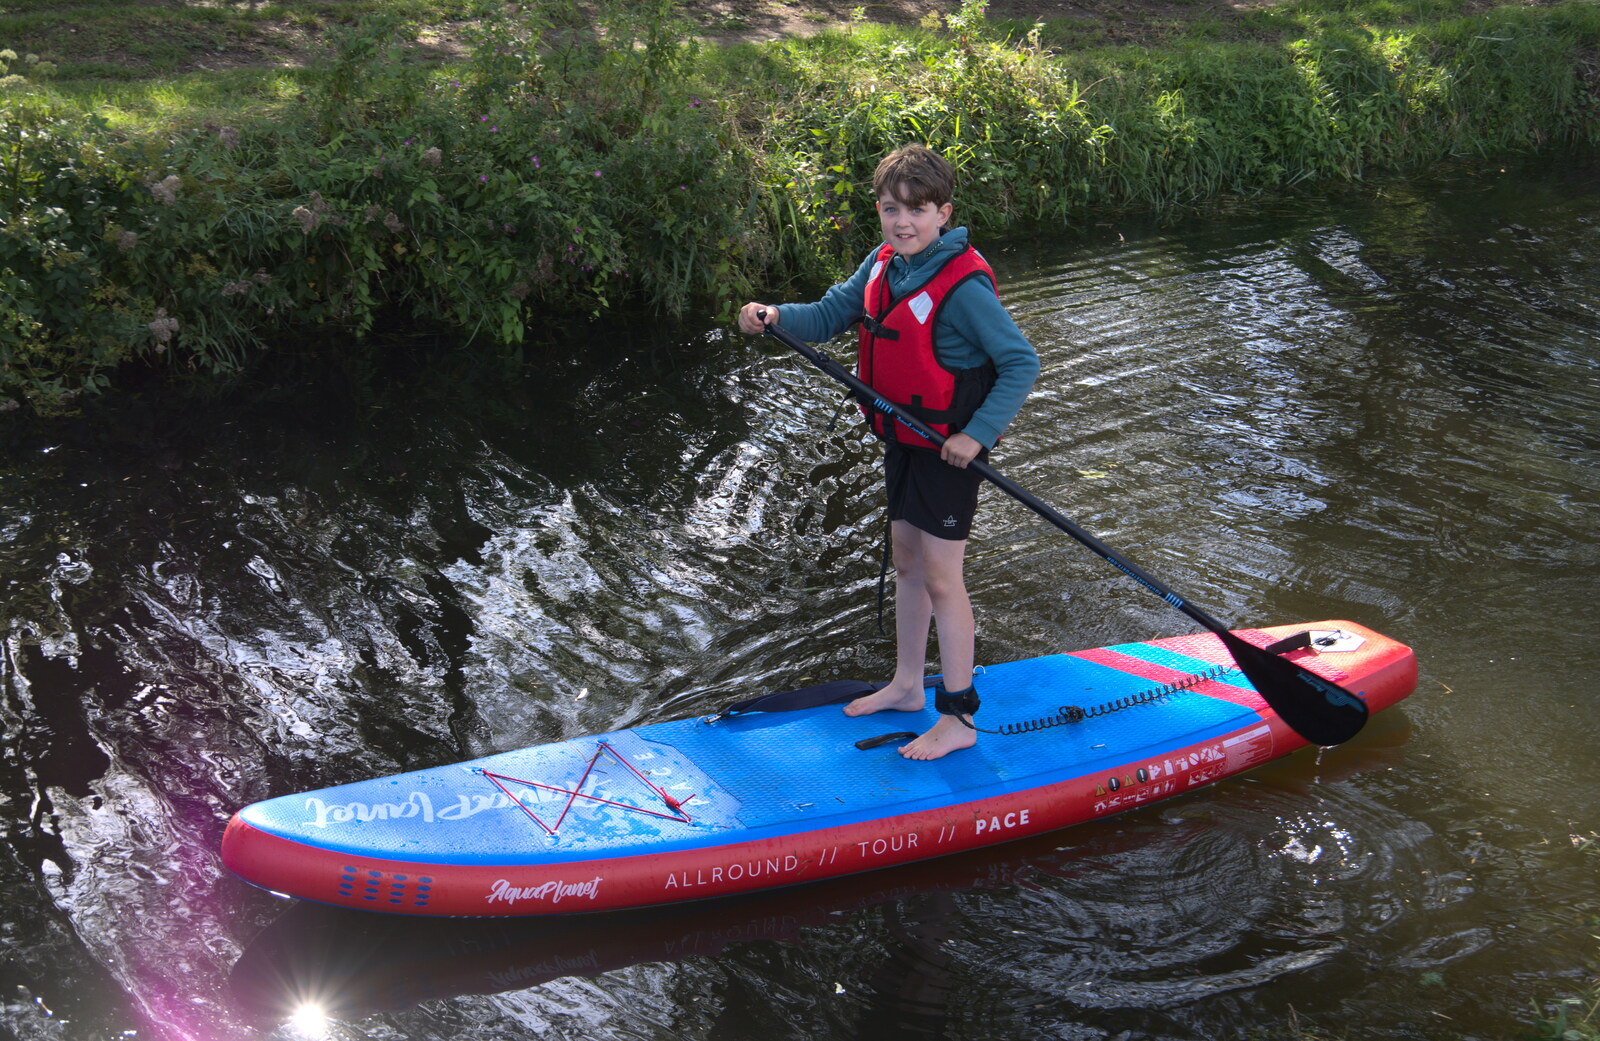 Camping at Three Rivers, Geldeston, Norfolk - 5th September 2020: Fred has a go at stand-up paddle-boarding